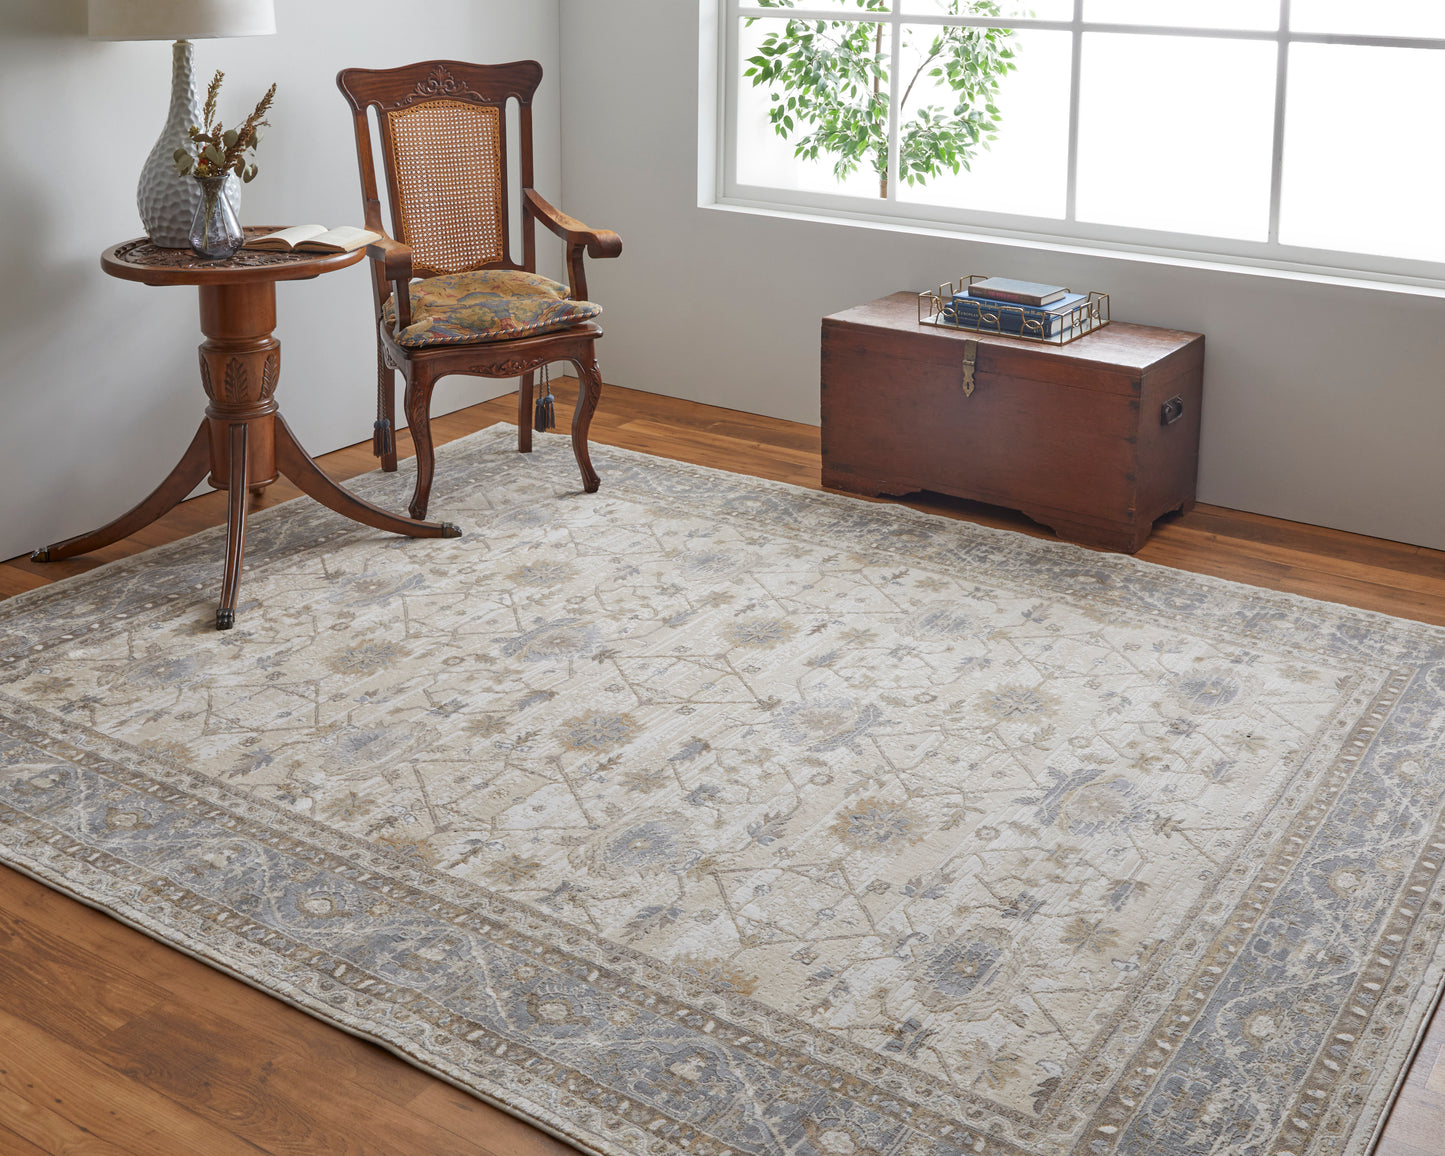 Celene 39KVF Power Loomed Synthetic Blend Indoor Area Rug by Feizy Rugs